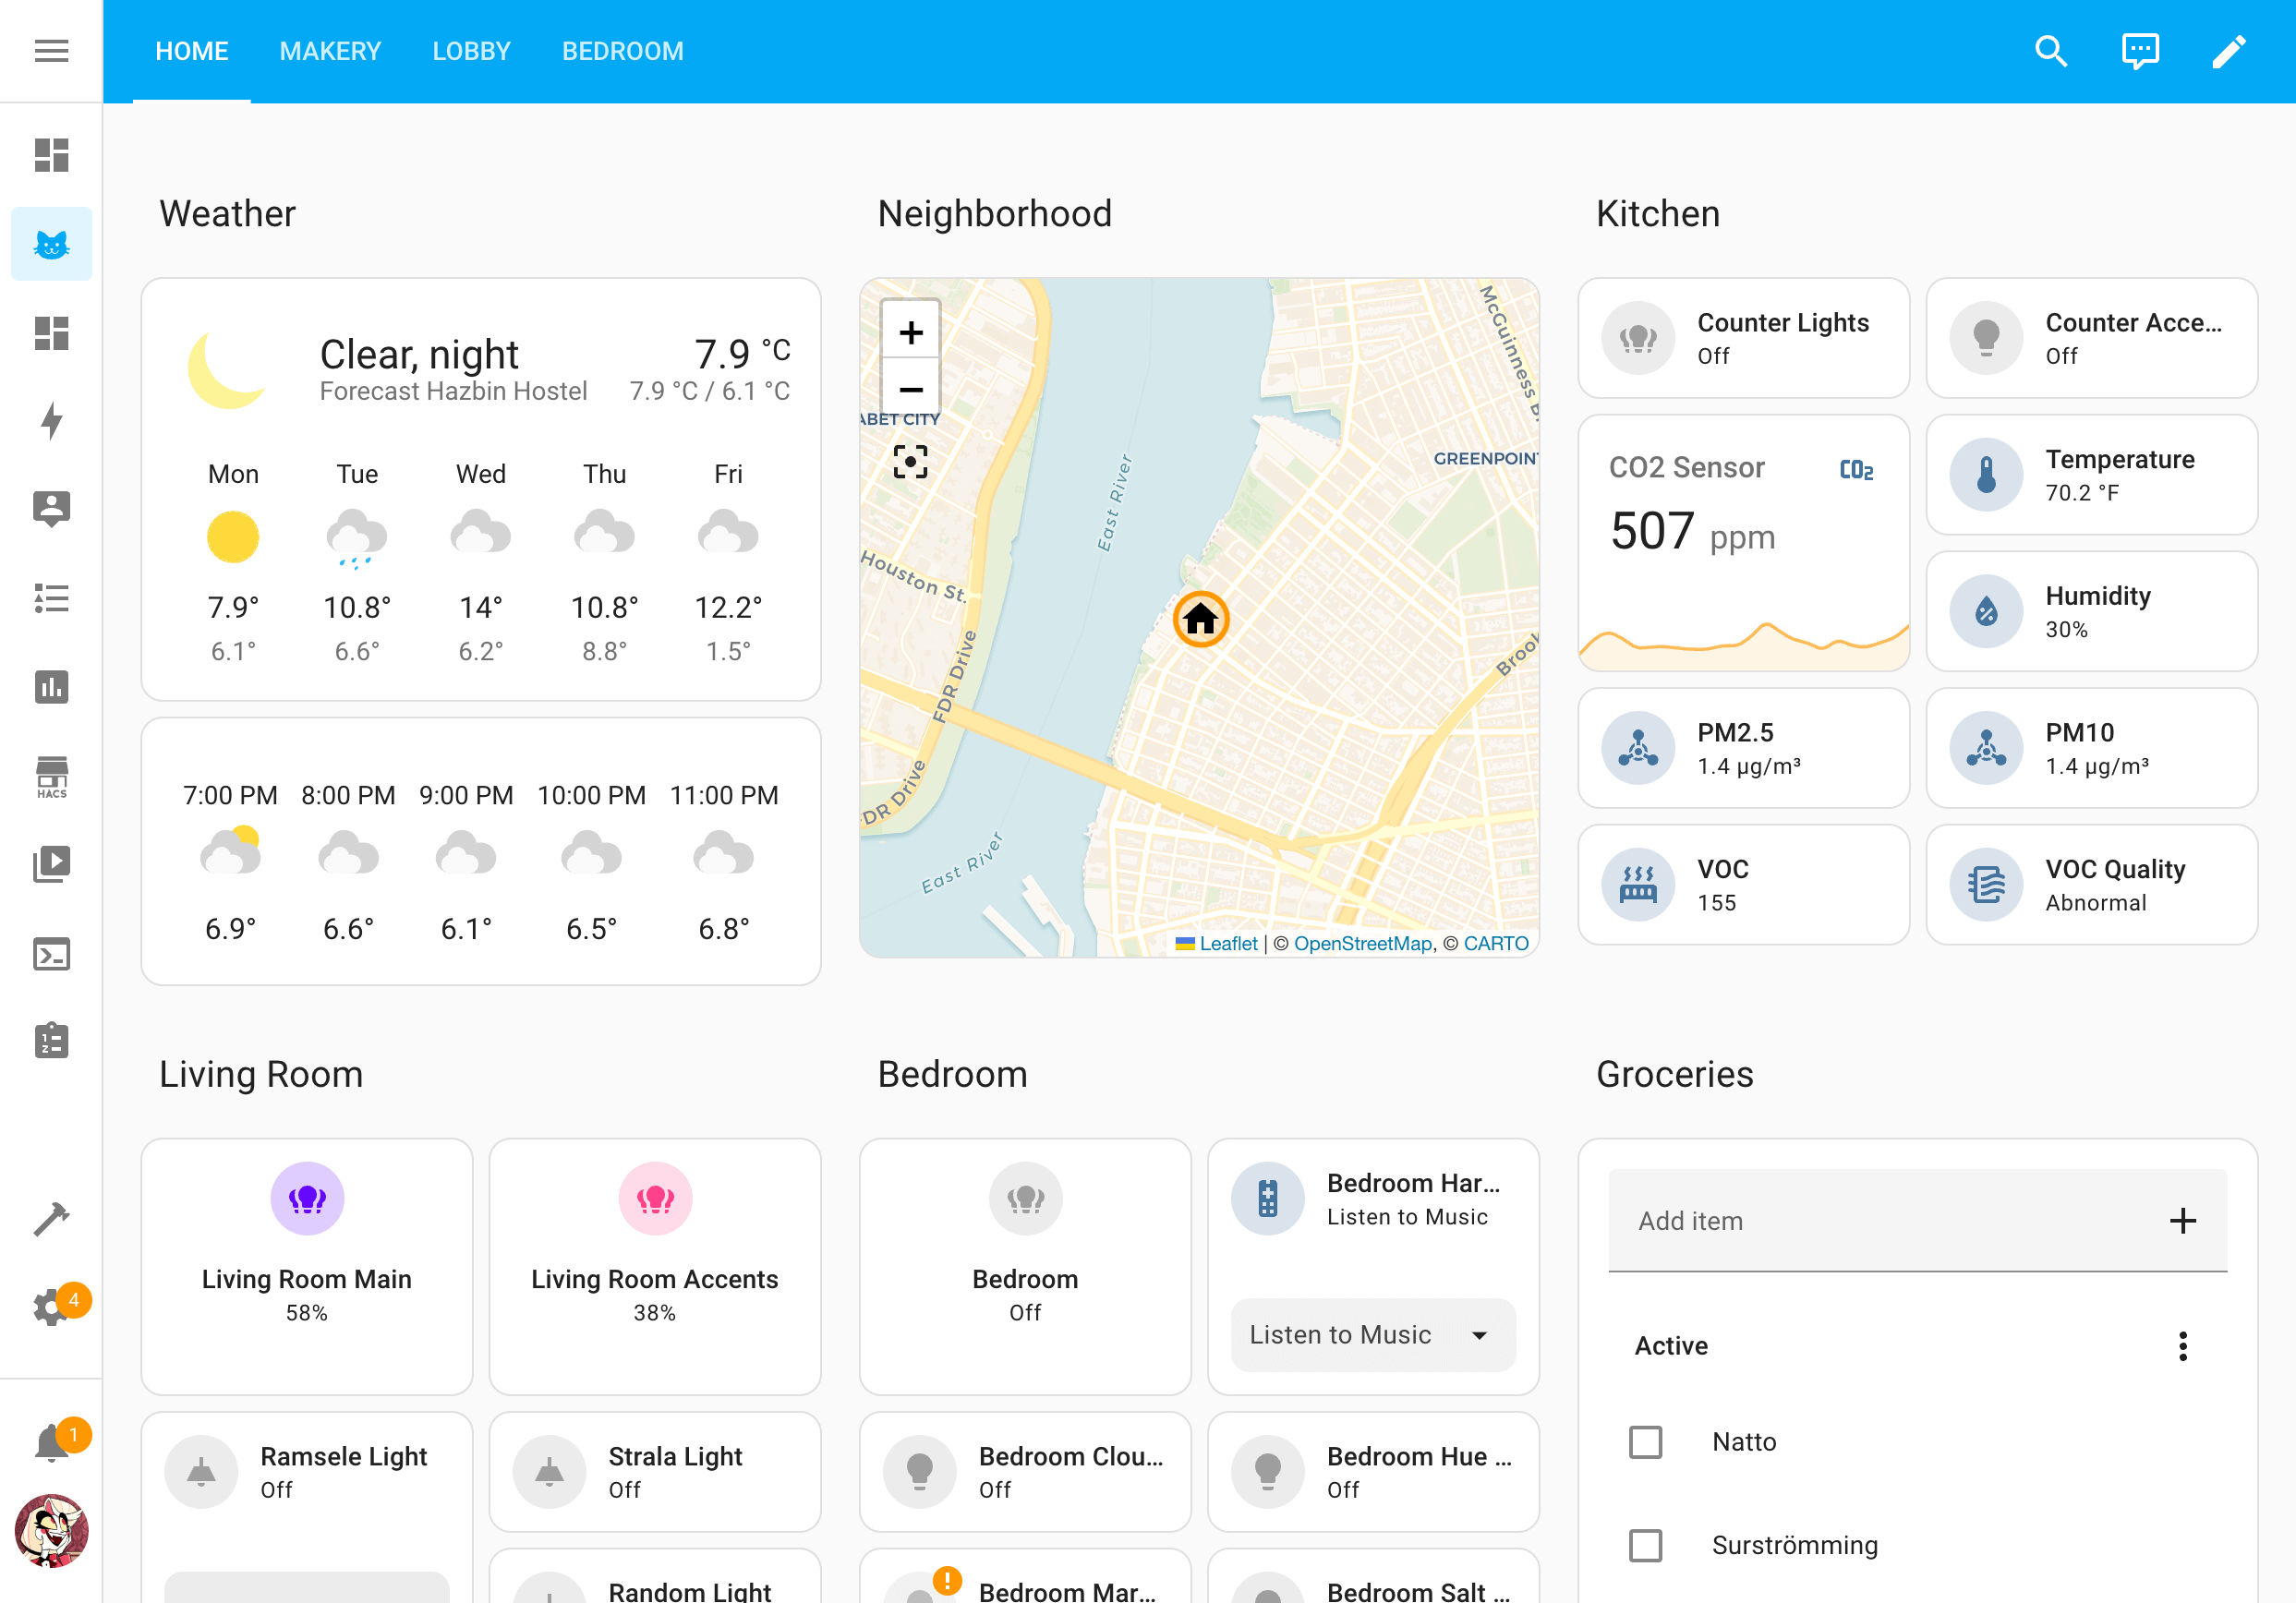 A fully populated dashboard in Sections view layout